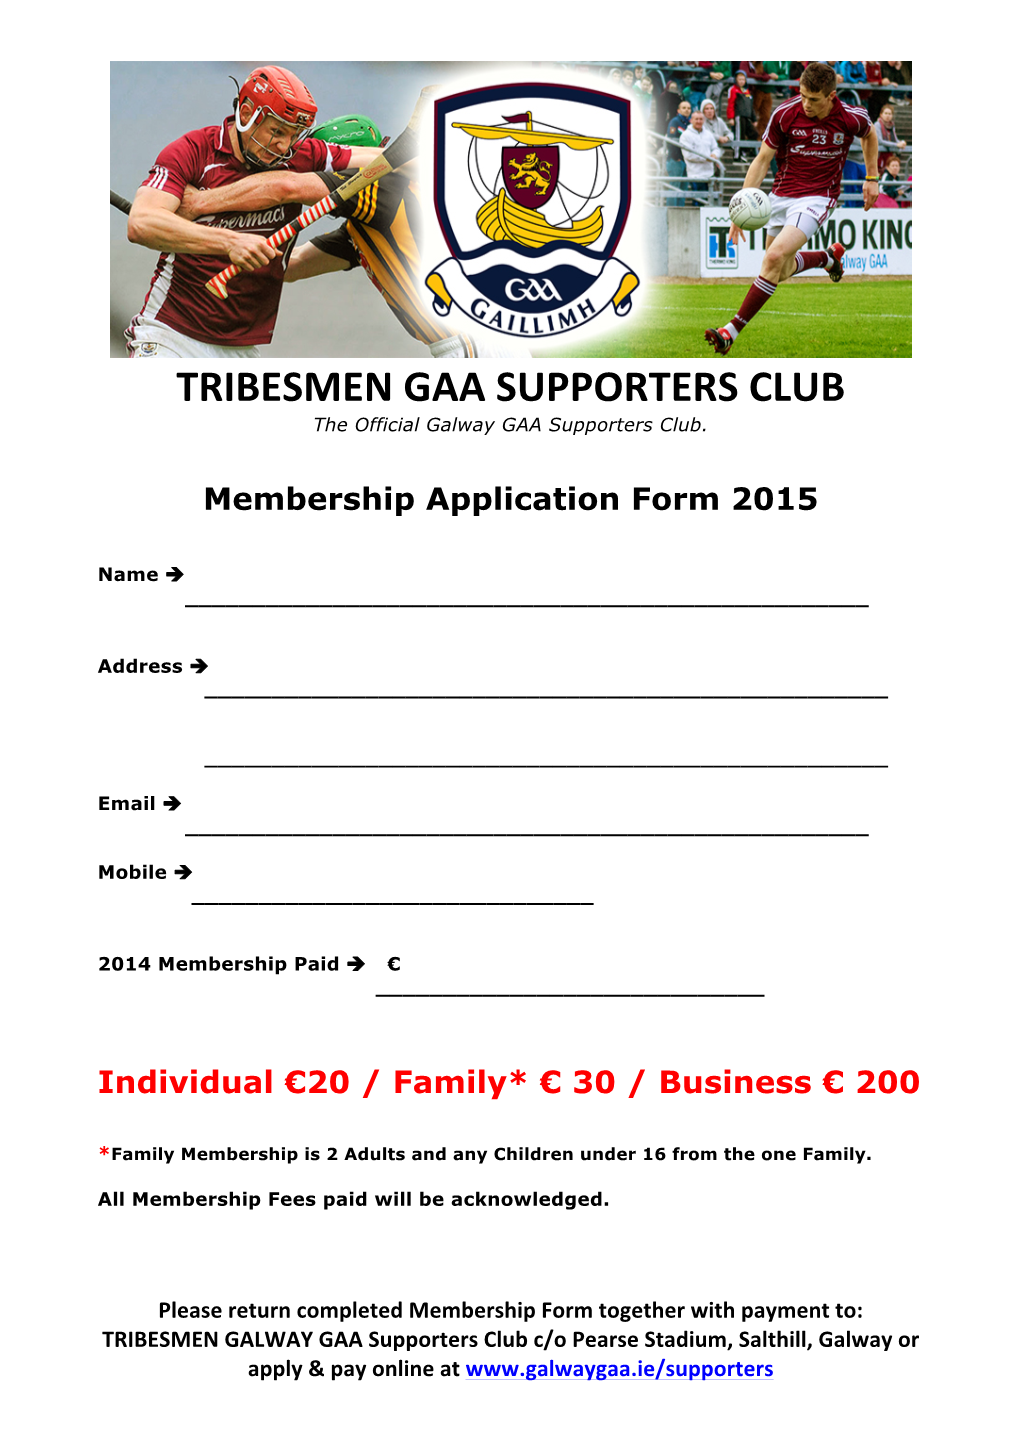 TRIBESMEN GAA SUPPORTERS CLUB the Official Galway GAA Supporters Club